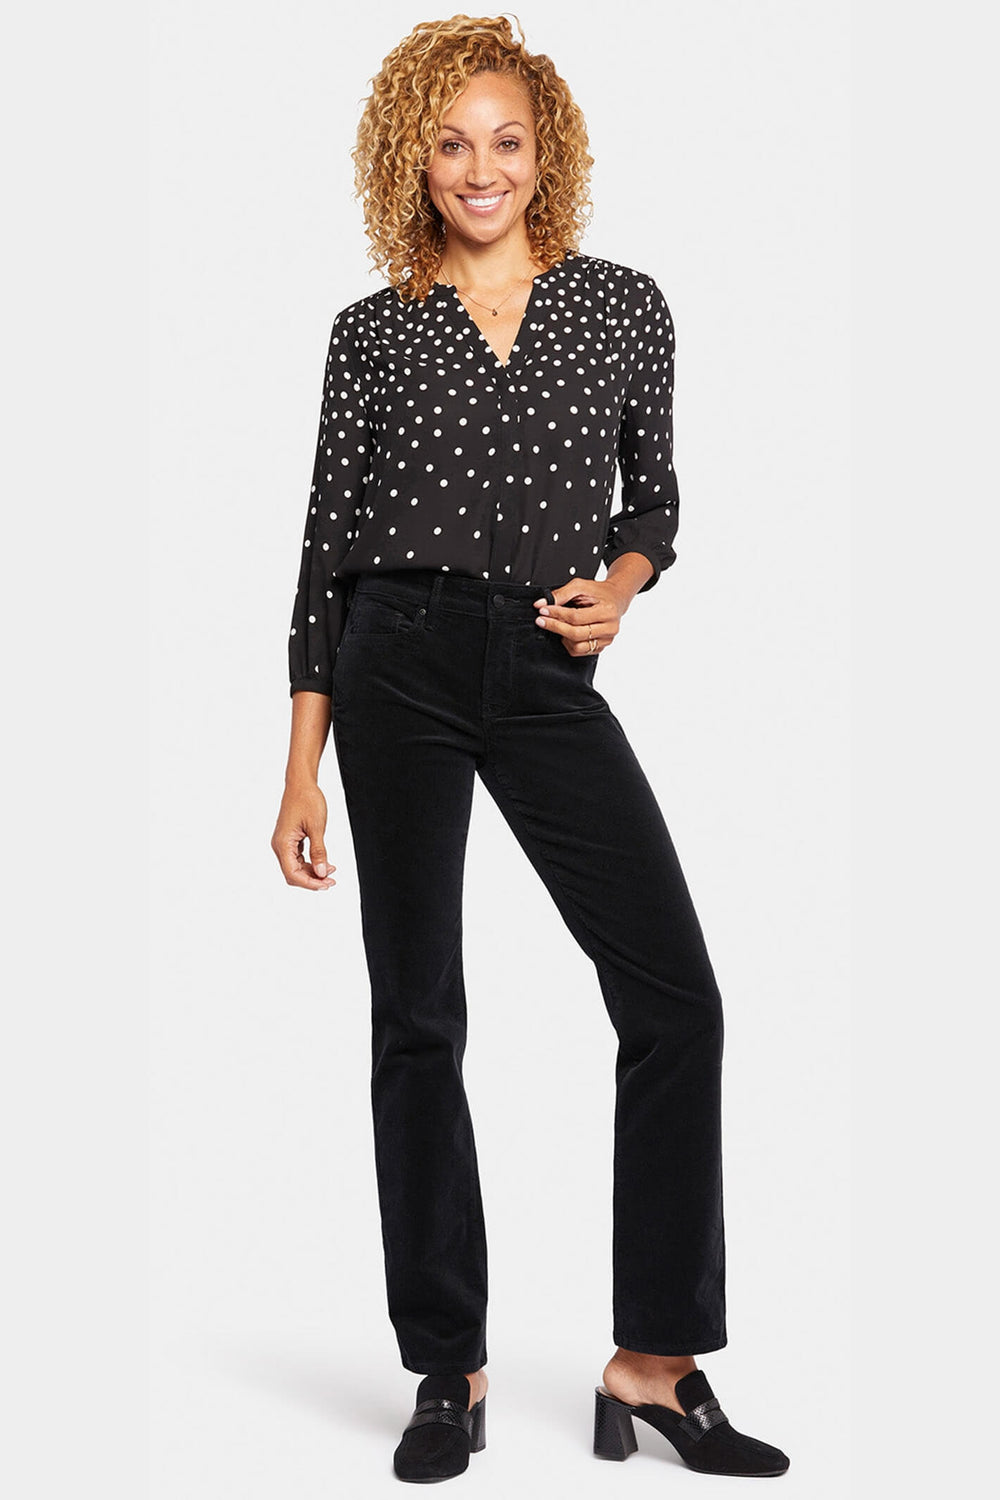 NYDJ Marilyn MBCRMS2299 Black Straight Corduroy Jeans - Shirley Allum Boutique